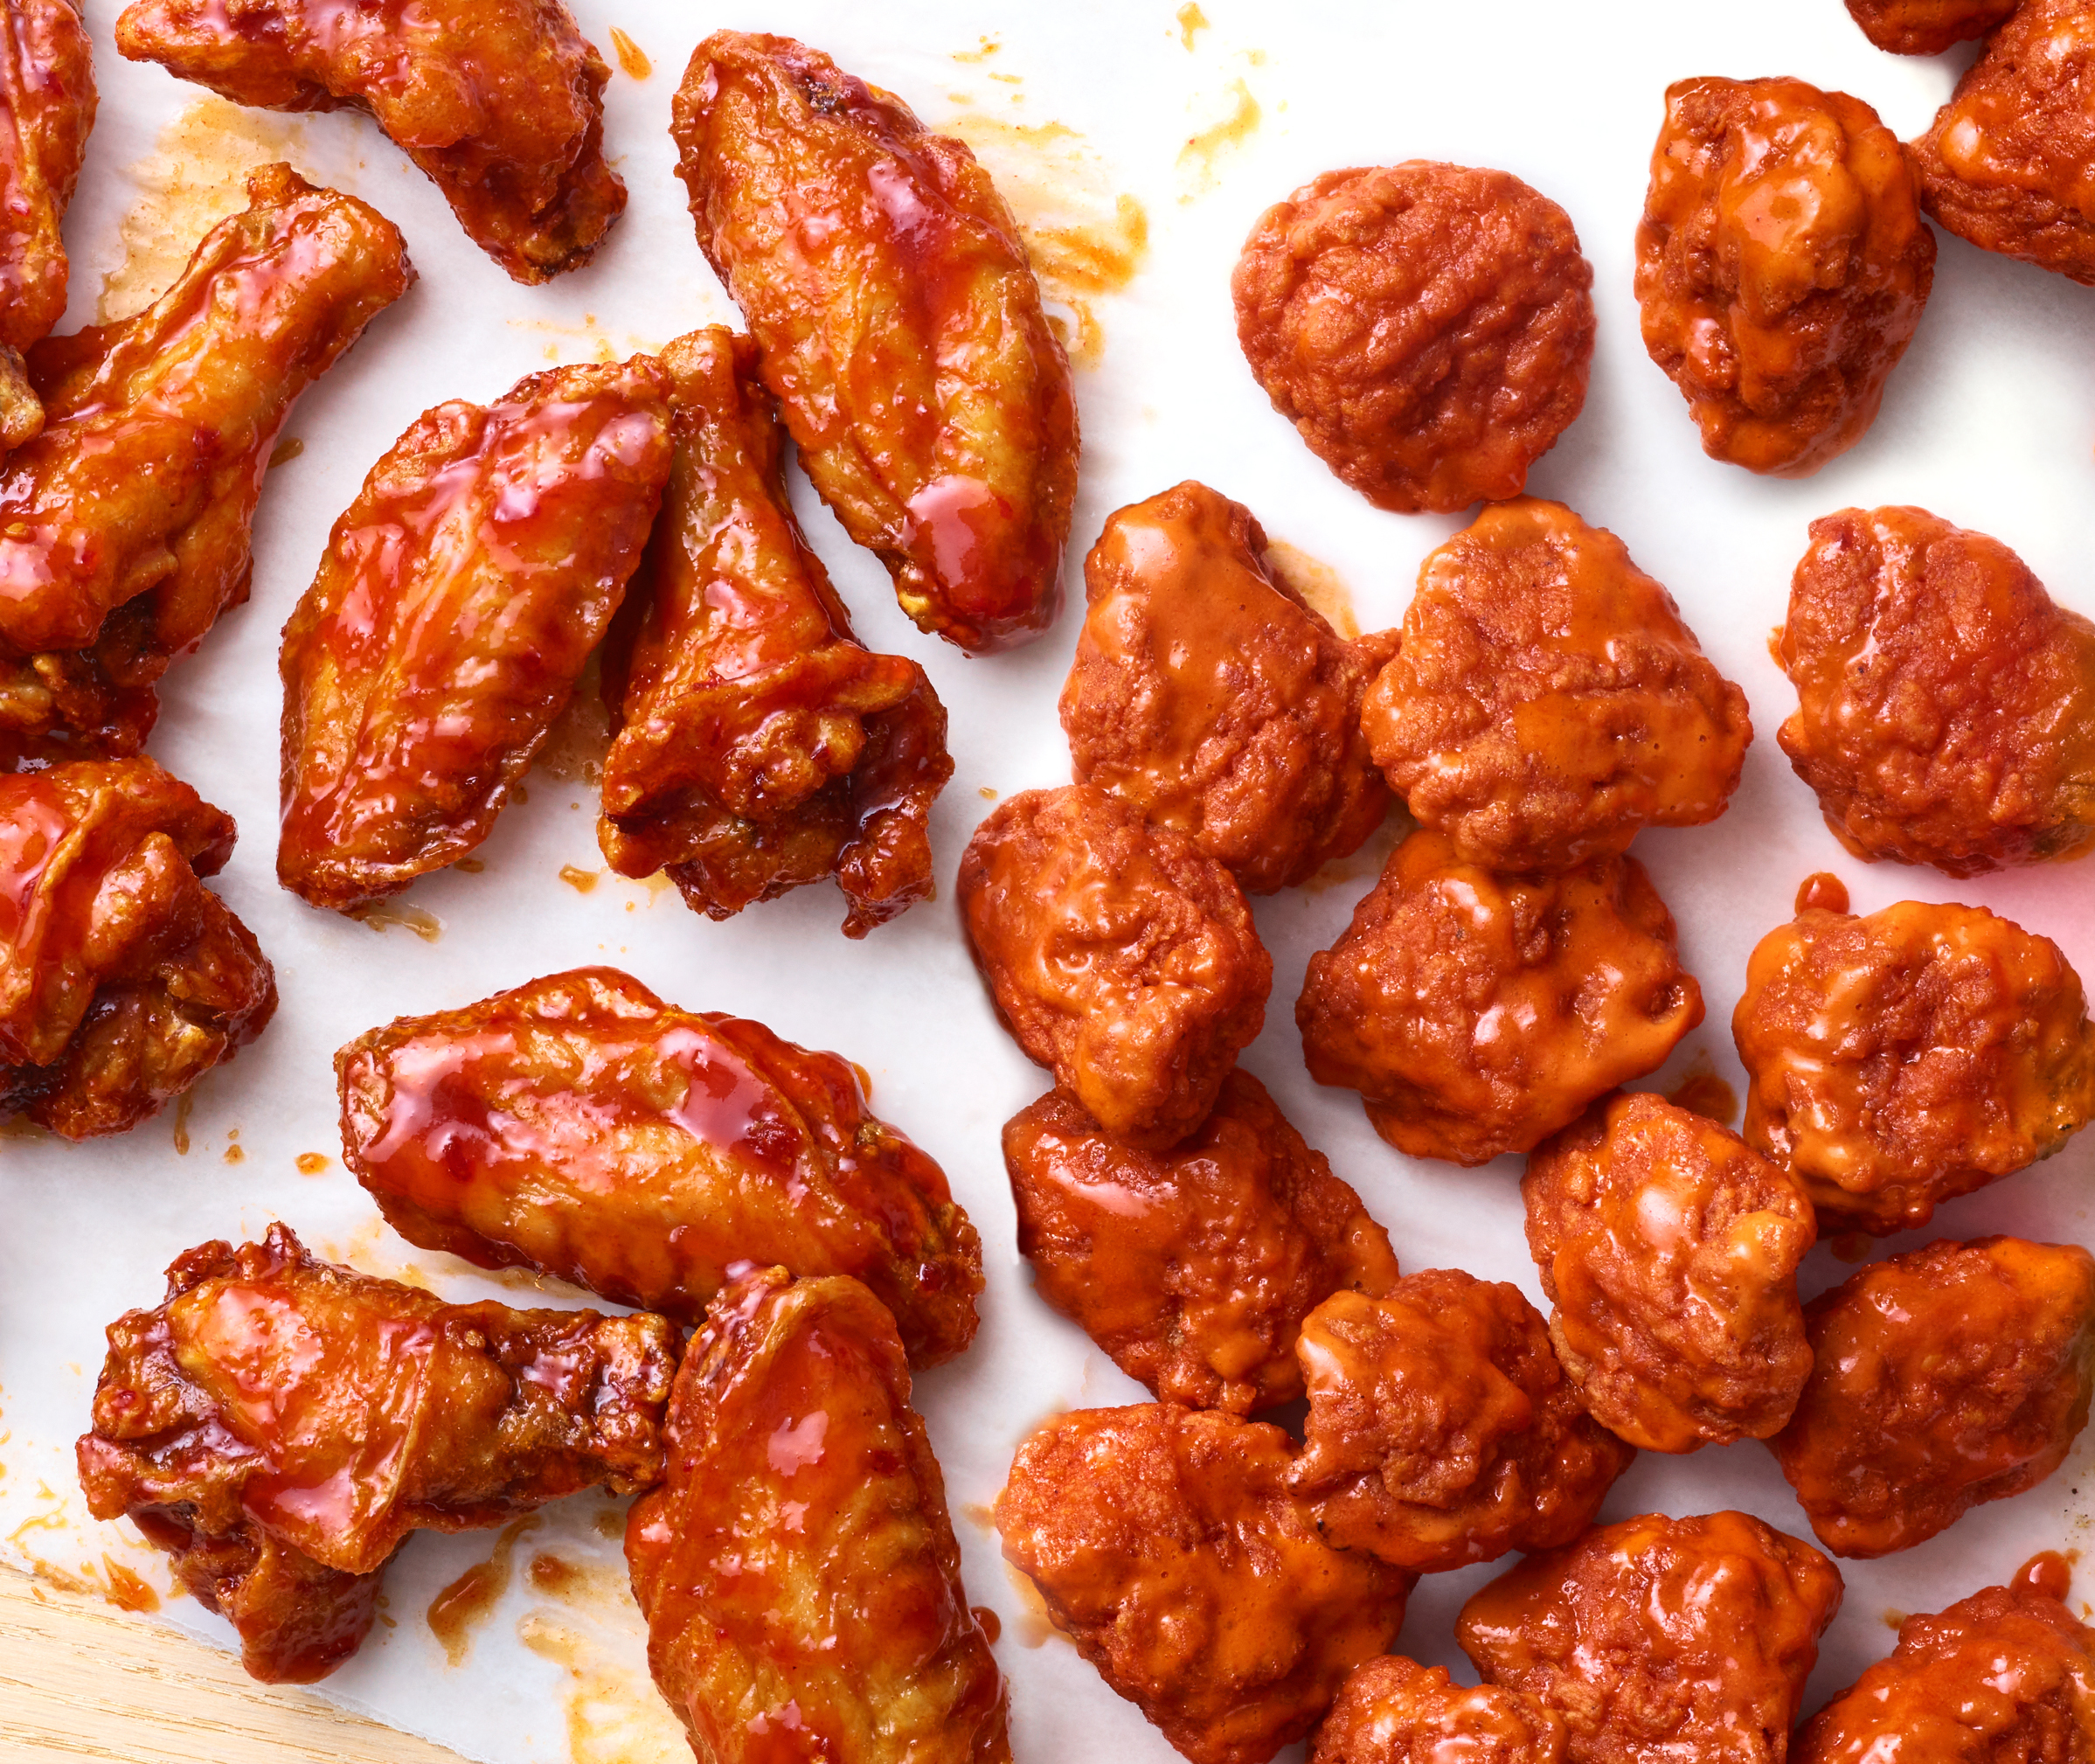 Saucy Applebee's® This National Chicken Day | Business Wire